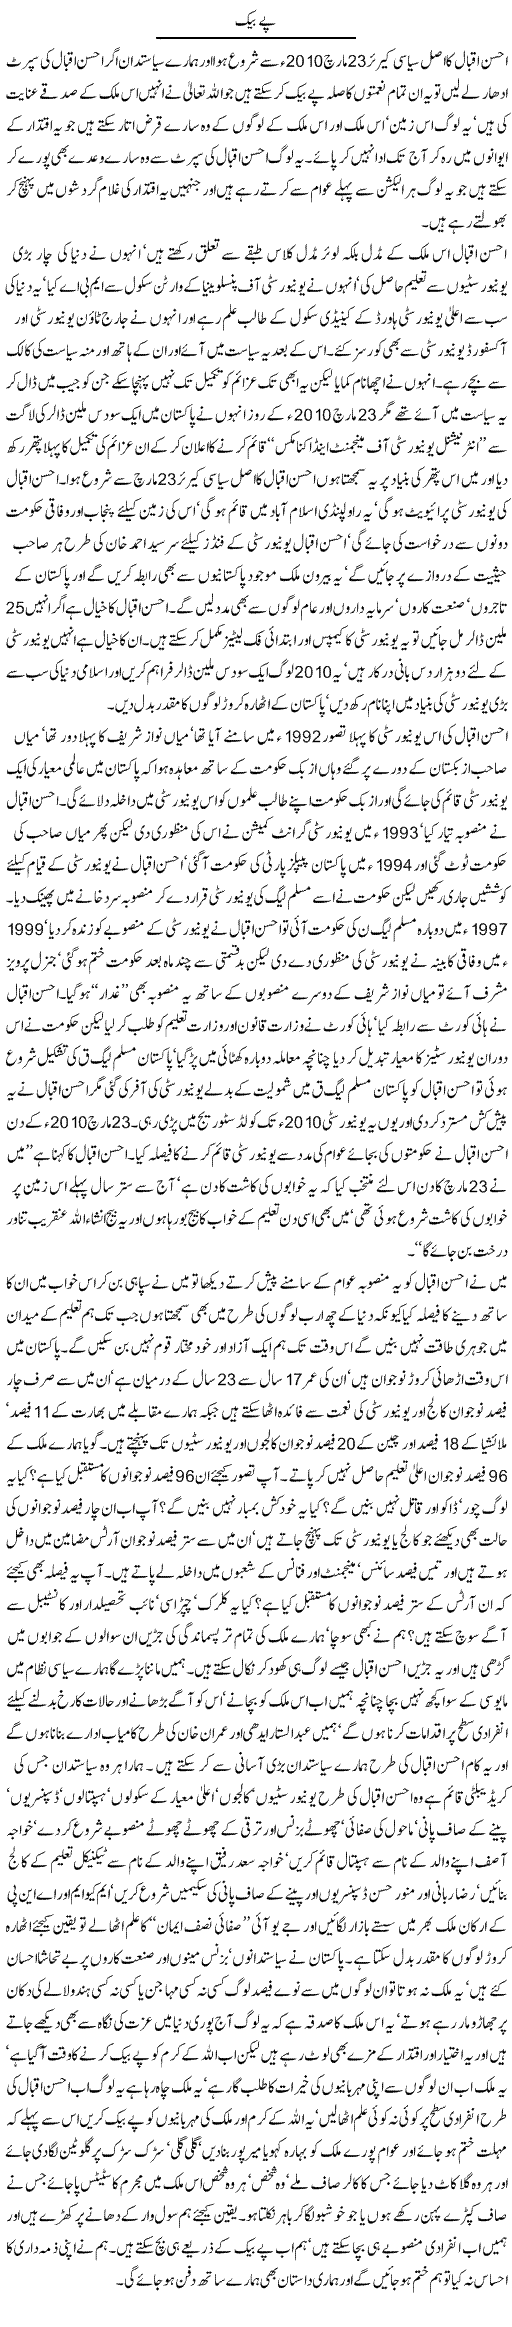 Pay Back Express Column Javed Chaudhary 25 March 2010